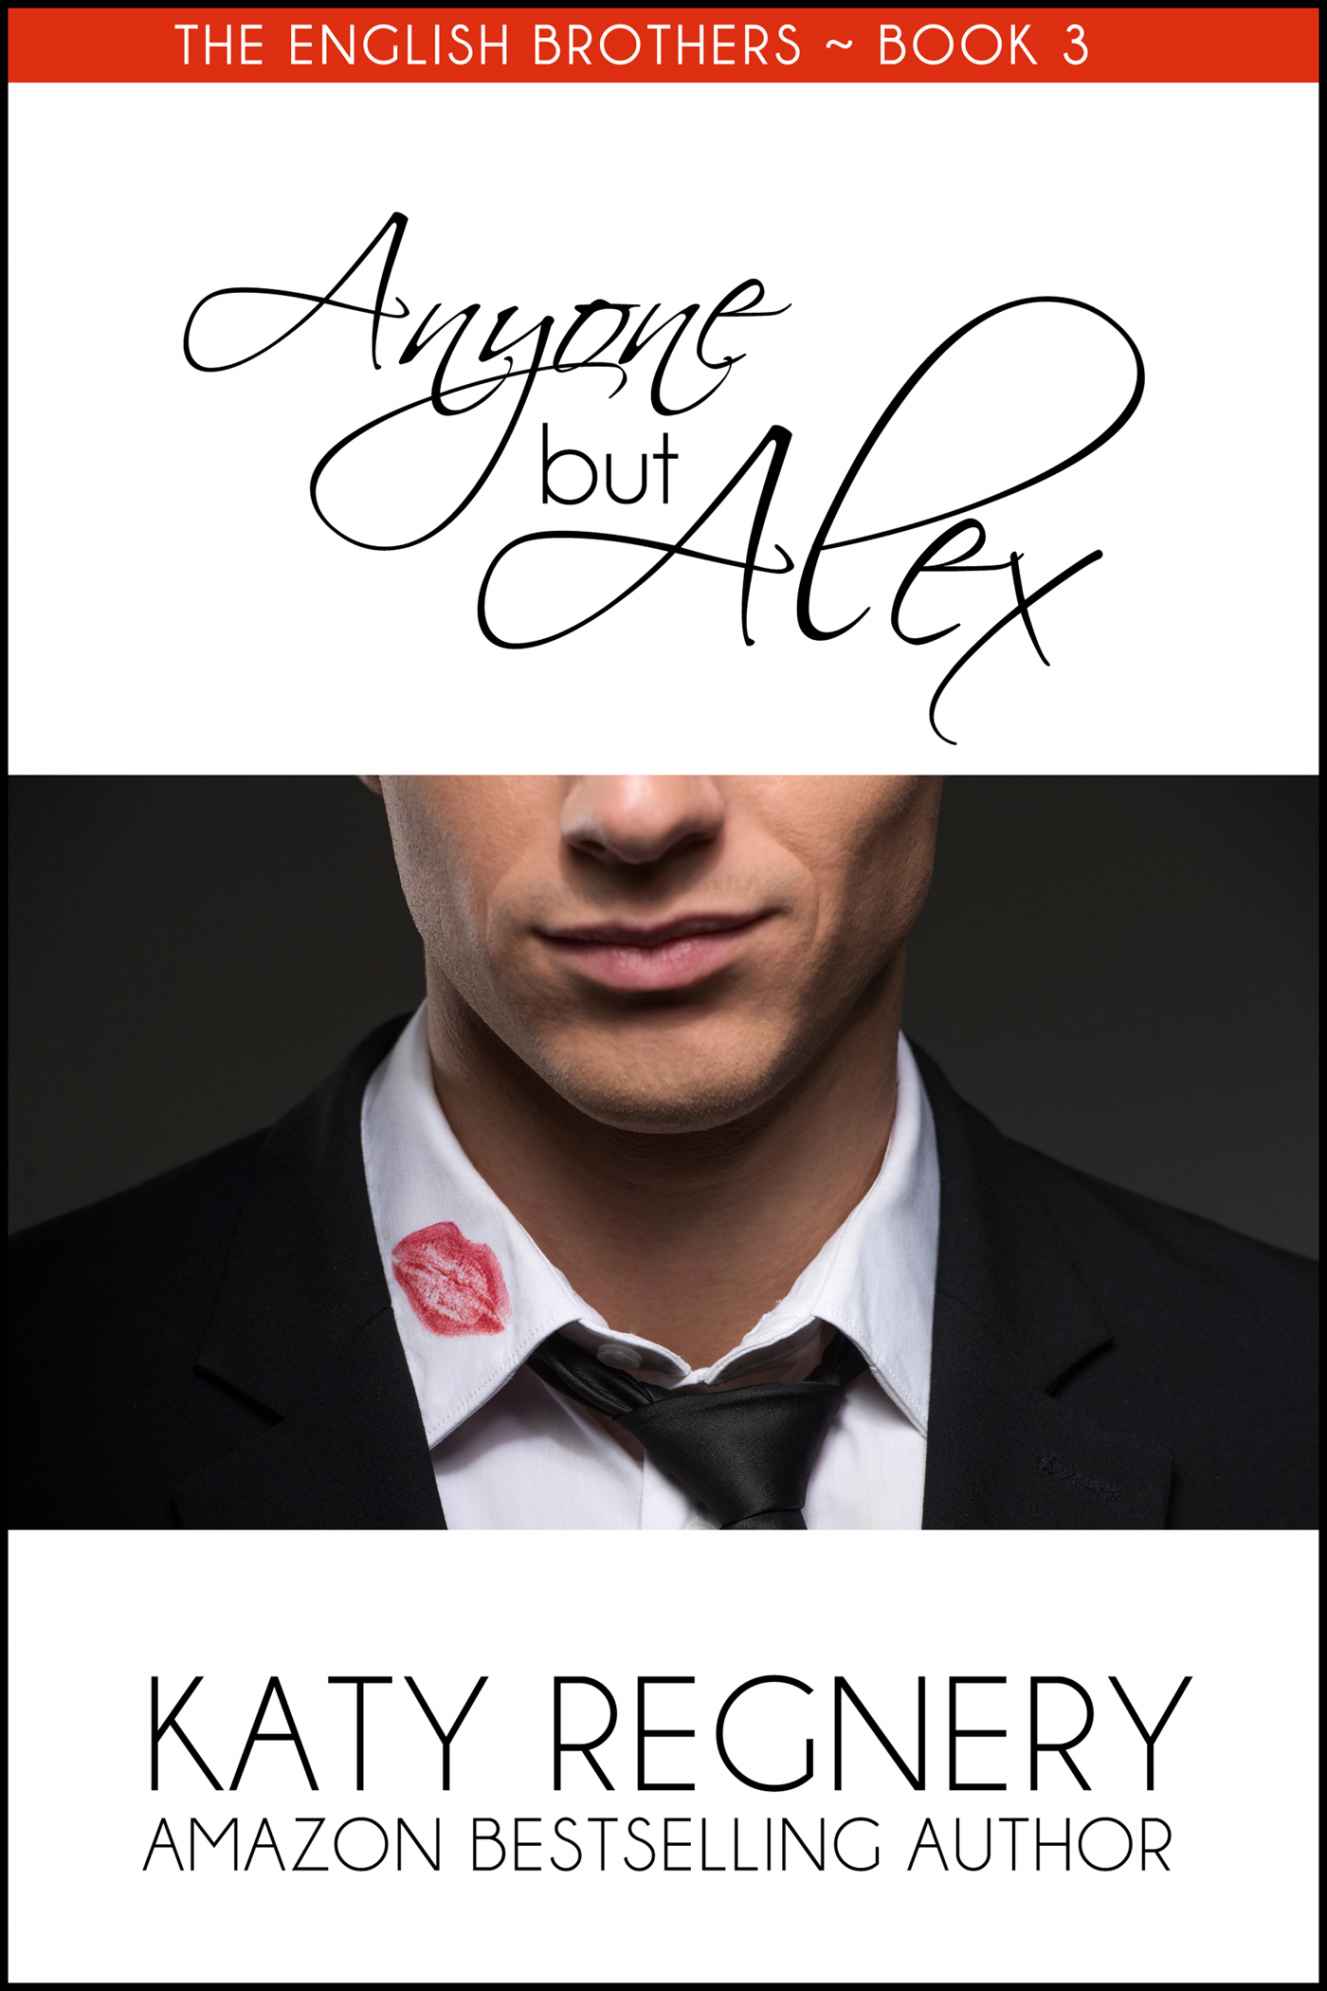 Anyone but Alex (The English Brothers Book 3) by Katy Regnery